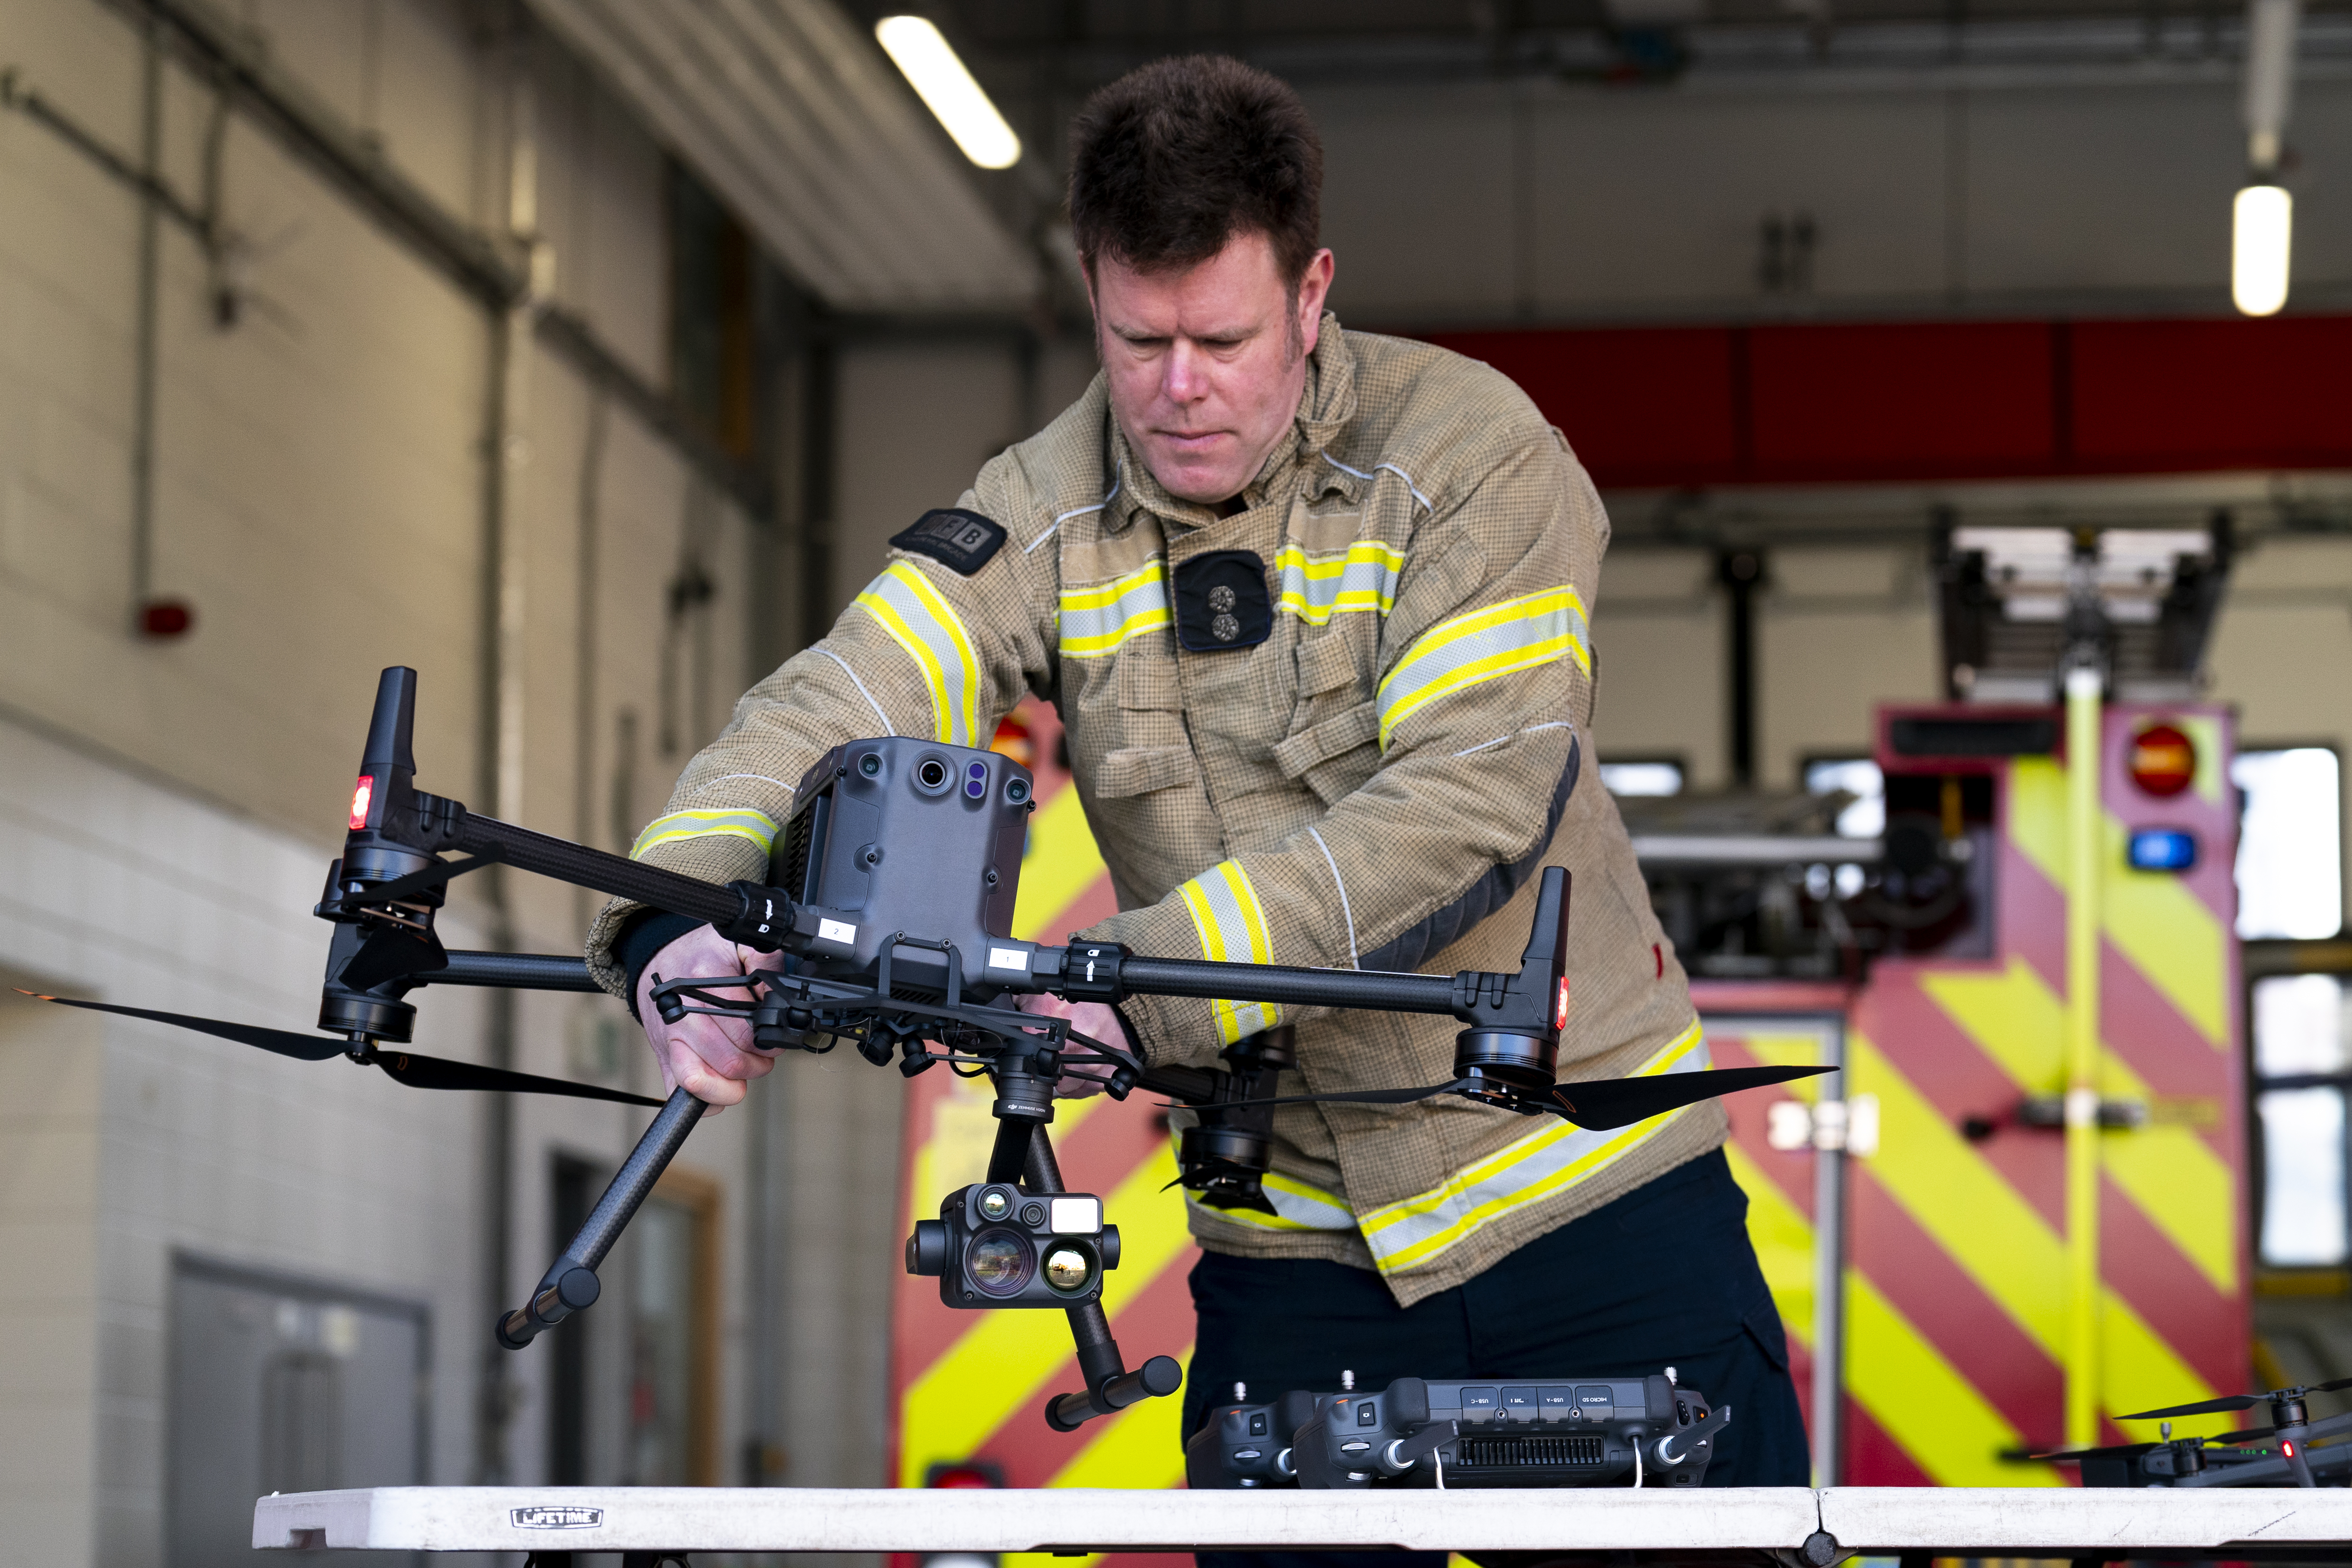 Firefighter with drone